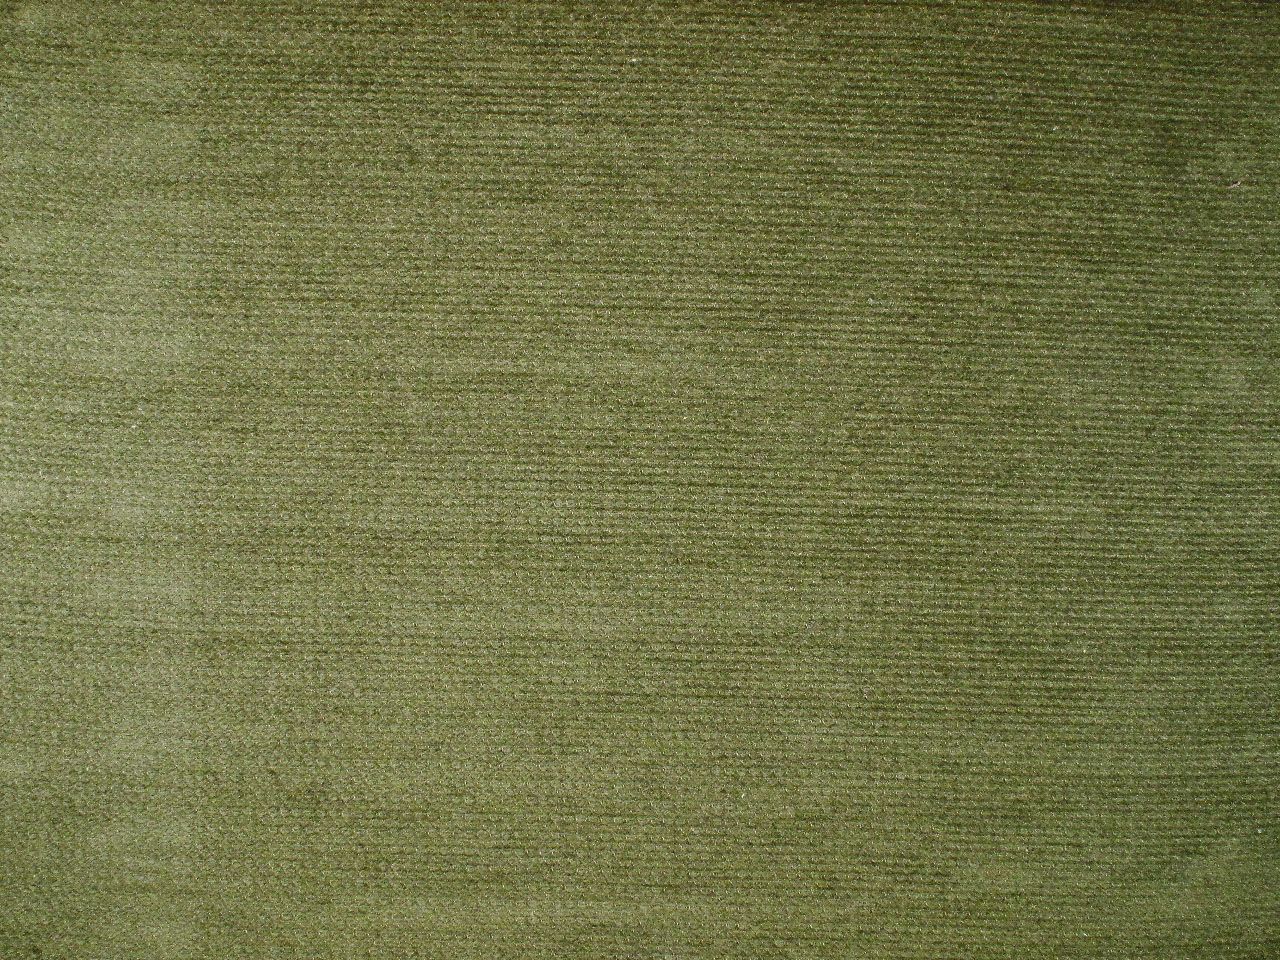 Yosemite fabric in moss color - pattern number PW 00071460 - by Scalamandre in the Old World Weavers collection